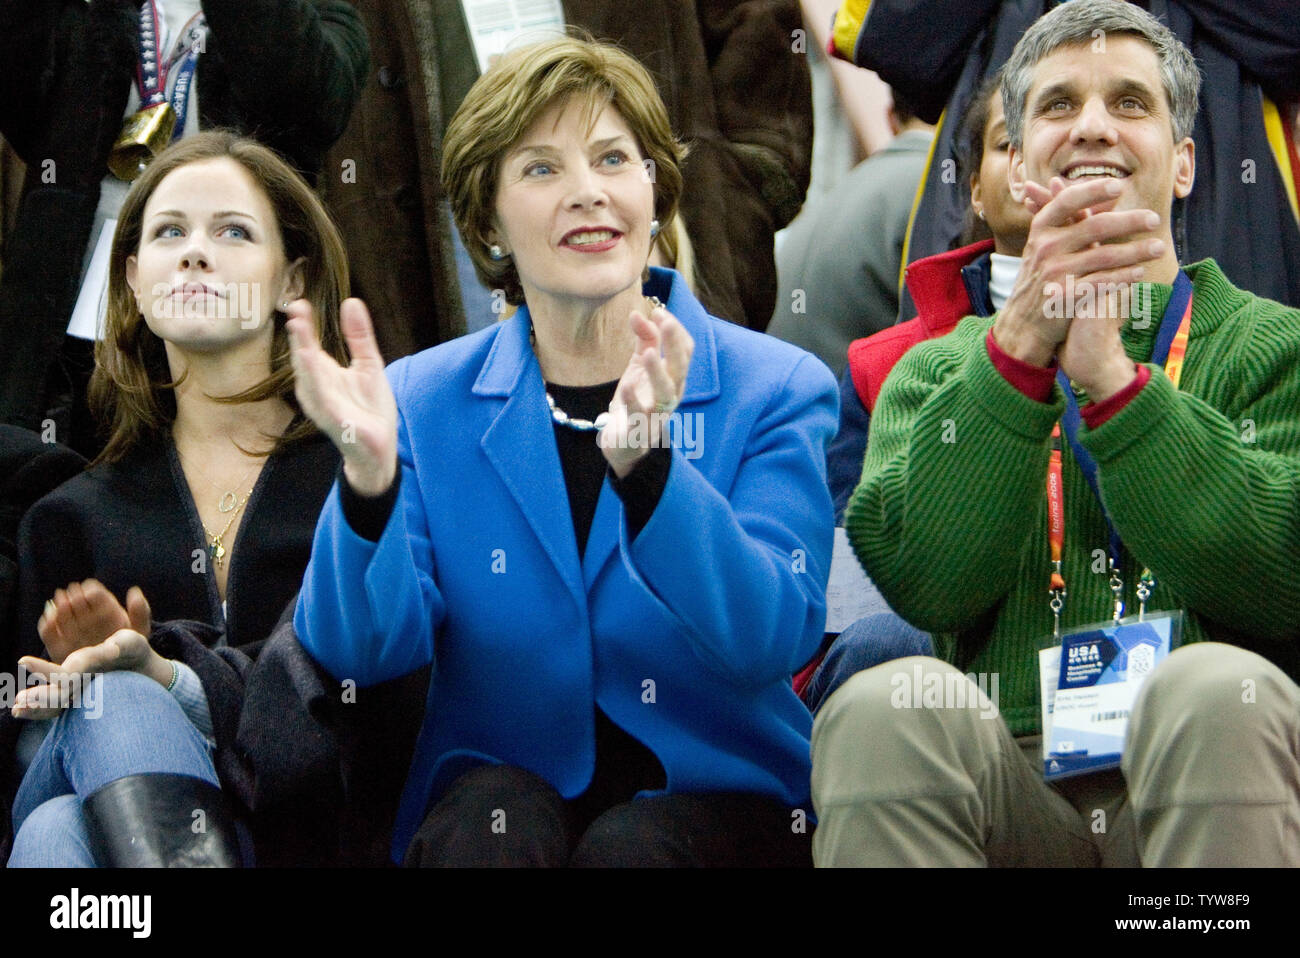 Laura Bush the wife of the President of the USA, with Eric Heiden (R), attends the men's 5000m speed skating at Oval Lingotto during the 2006 Torino Winter Olympic Games, February 11, 2006.  Chad Hedrick of the USA won gold.  (UPI Photo/Heinz Ruckemann) Stock Photo